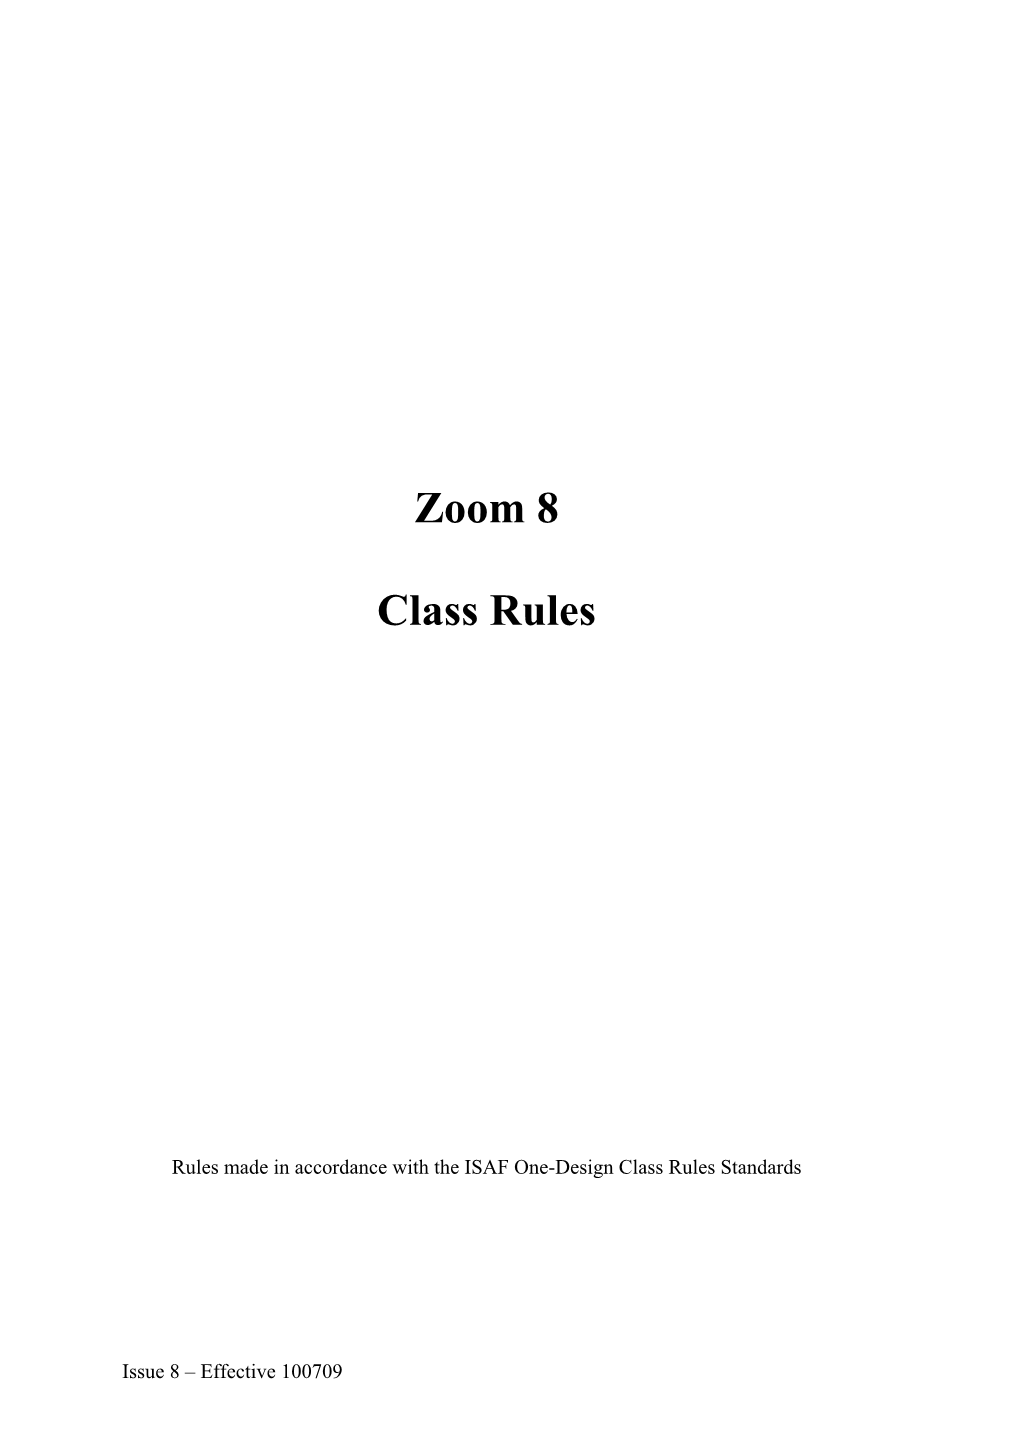 Zoom 8 Class Rules